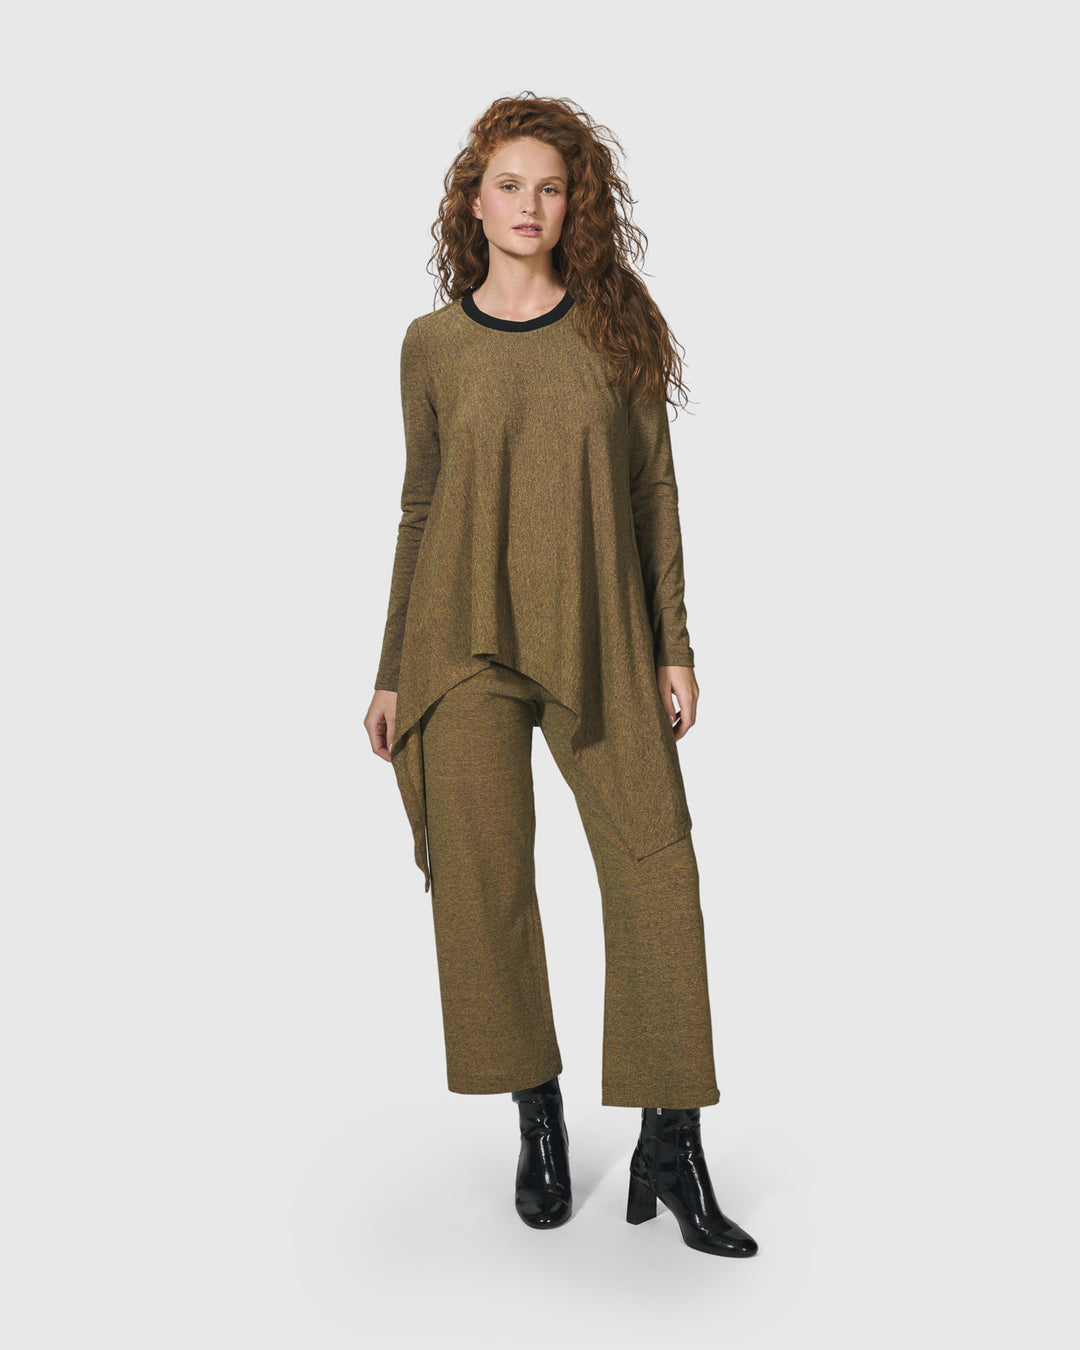 Essential Cropped Pants, Honey